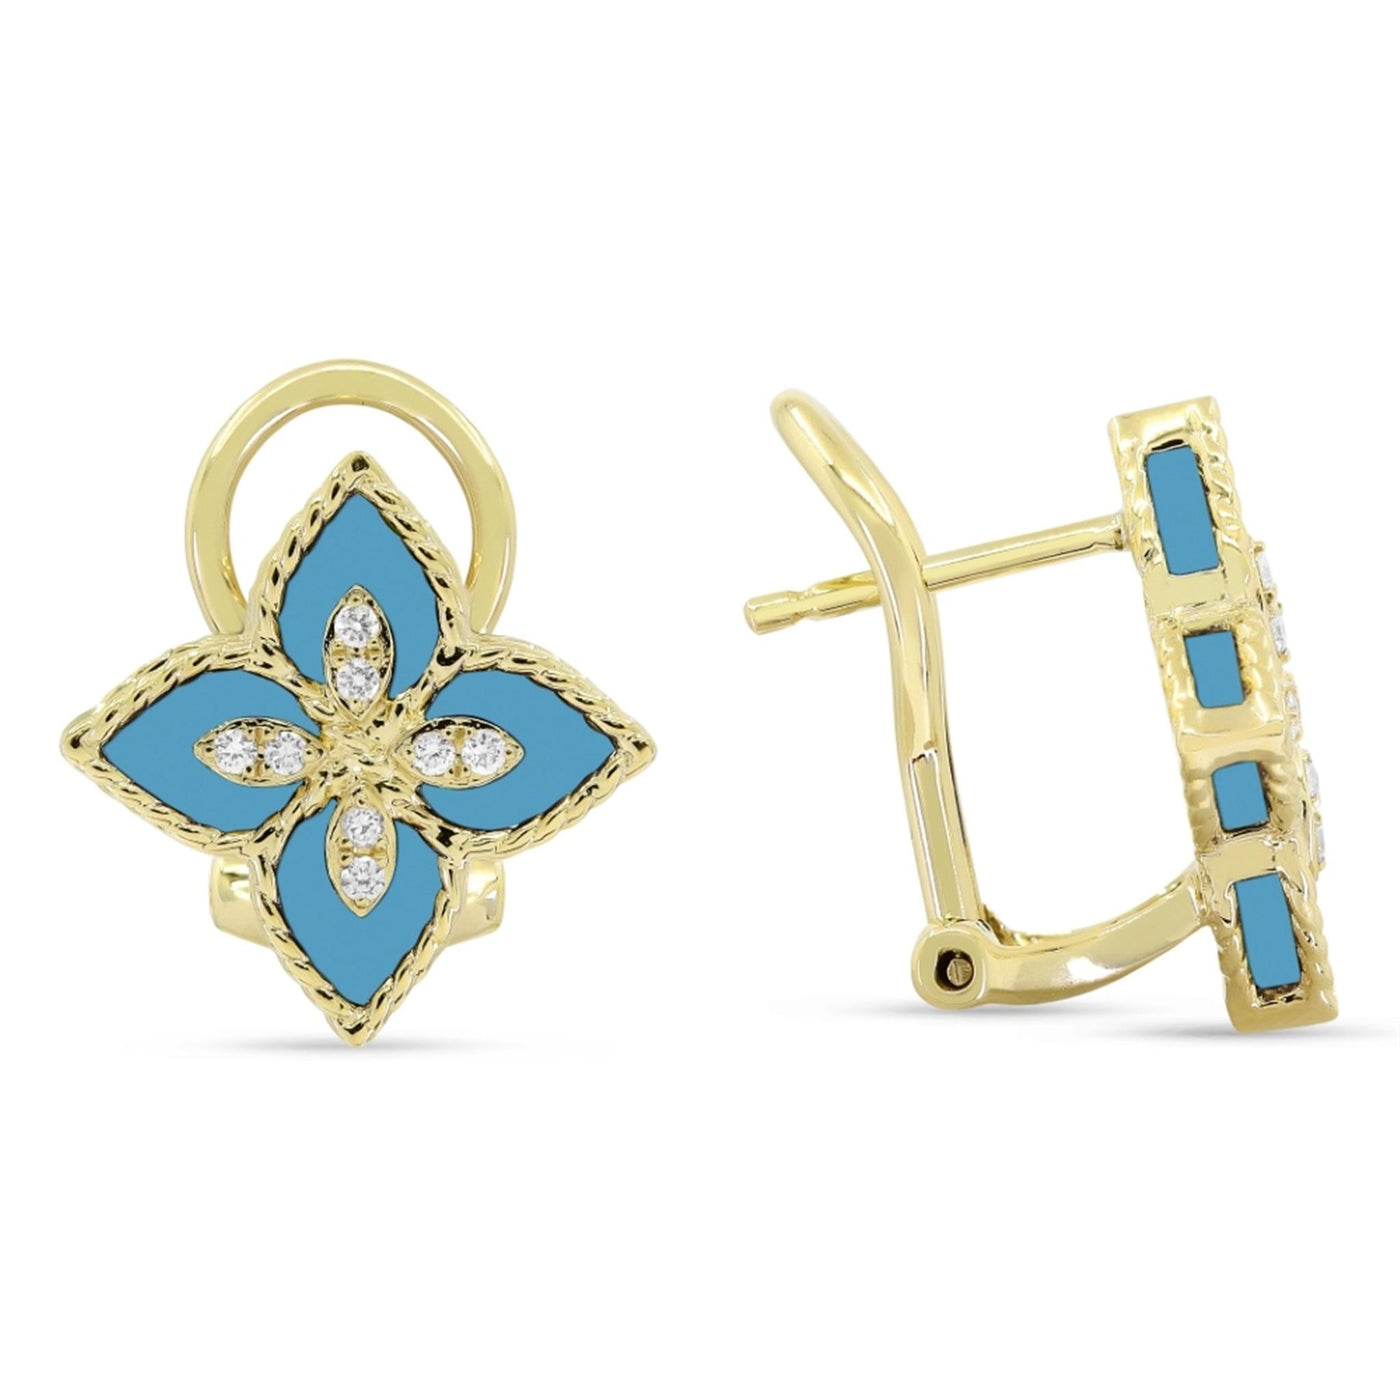 14K Yellow Gold 2.46ctw Etruscan Floral Style Fantasy Cut Turquoises and Diamonds Earrings